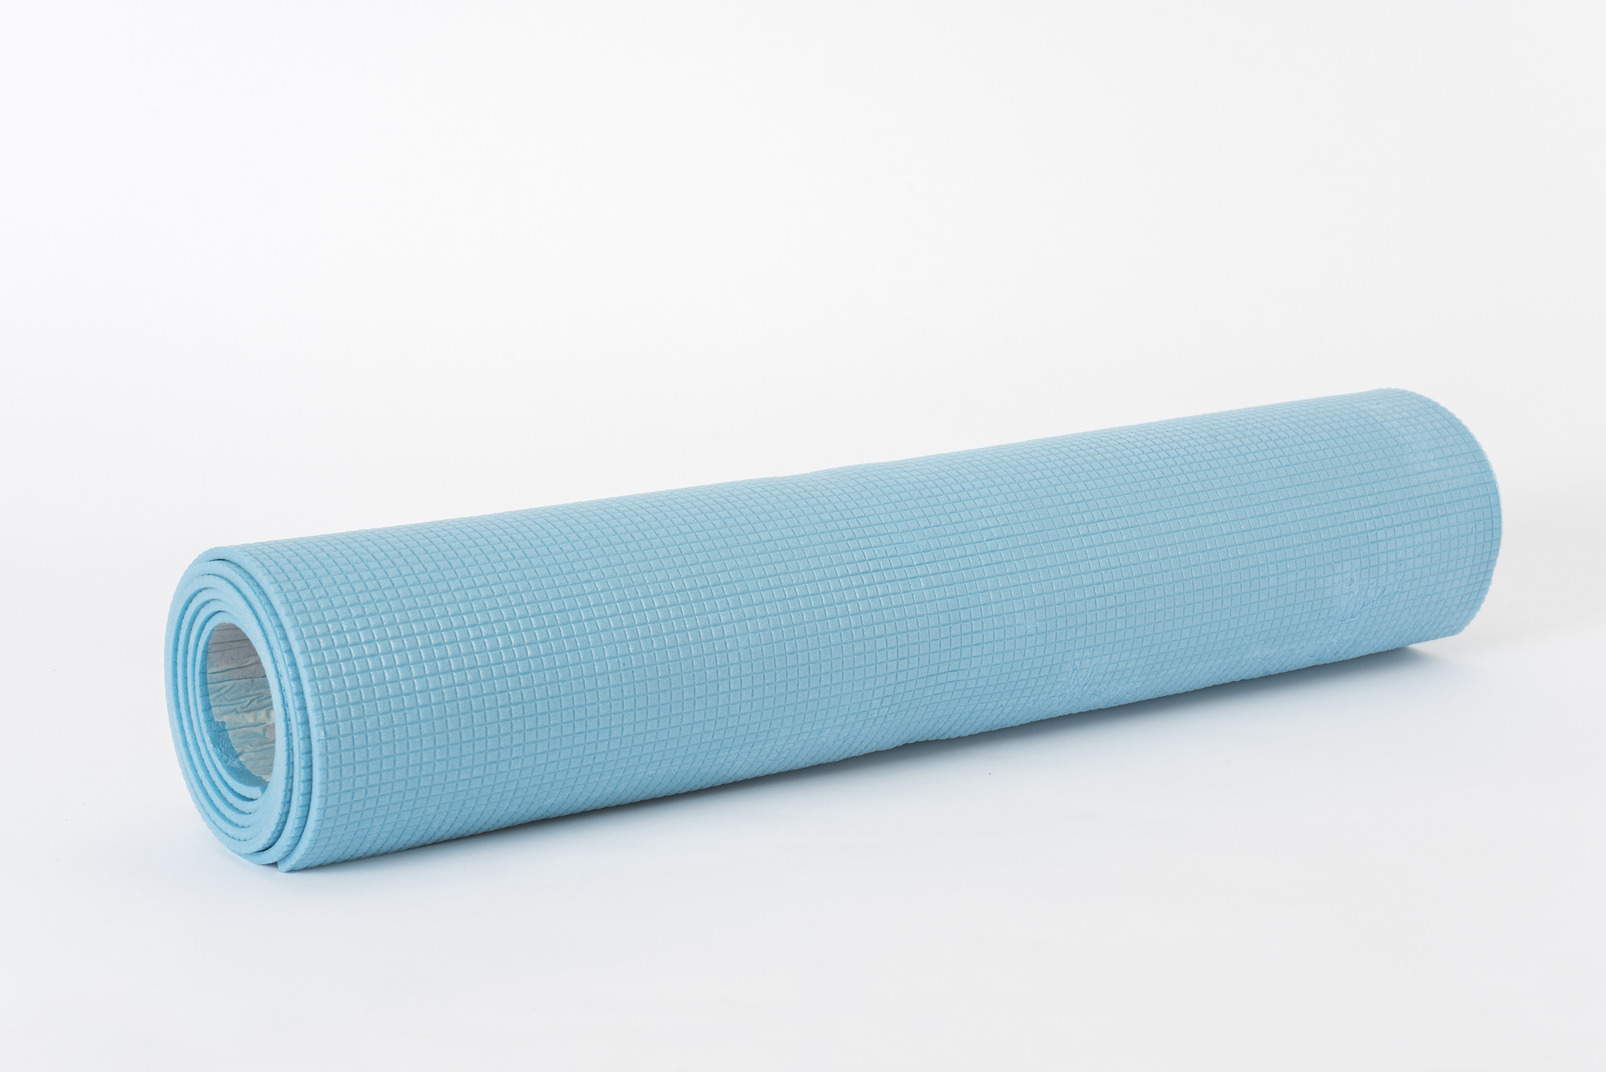 Blue yoga mat on a white background